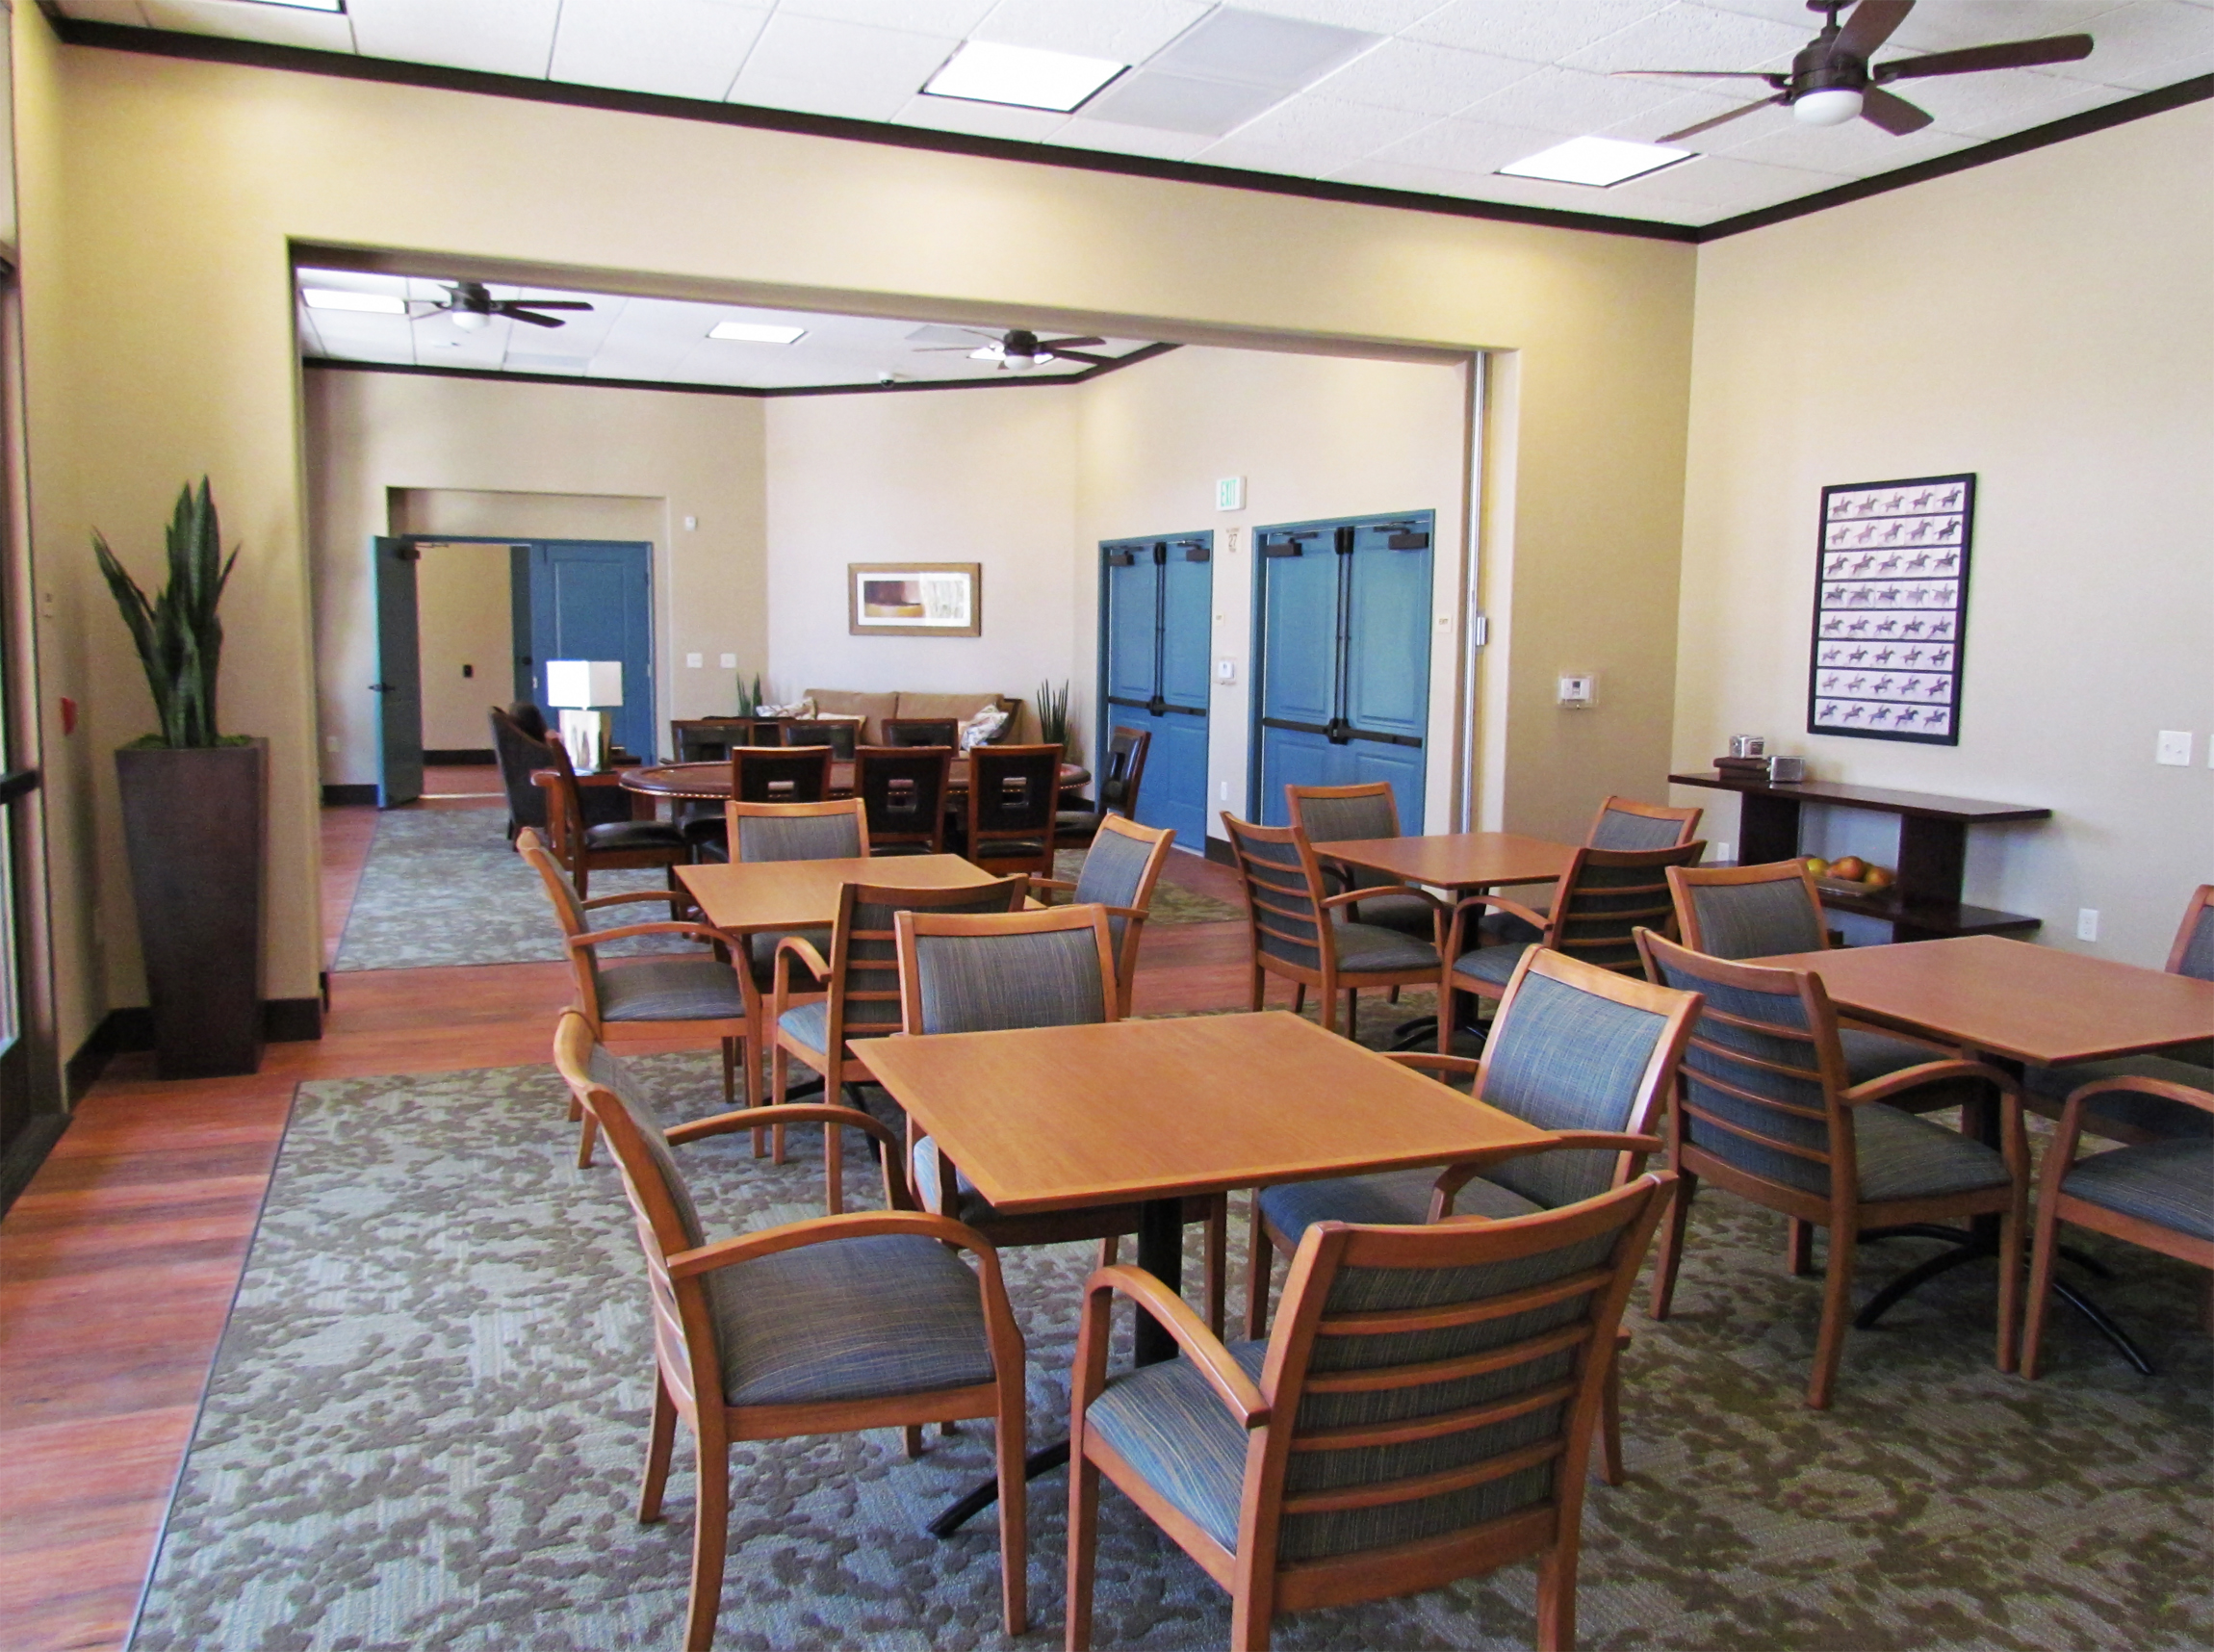 Interior view of a clubhouse at Osborne Street Apartments. 4 square tables and chairs and long oval table with chairs